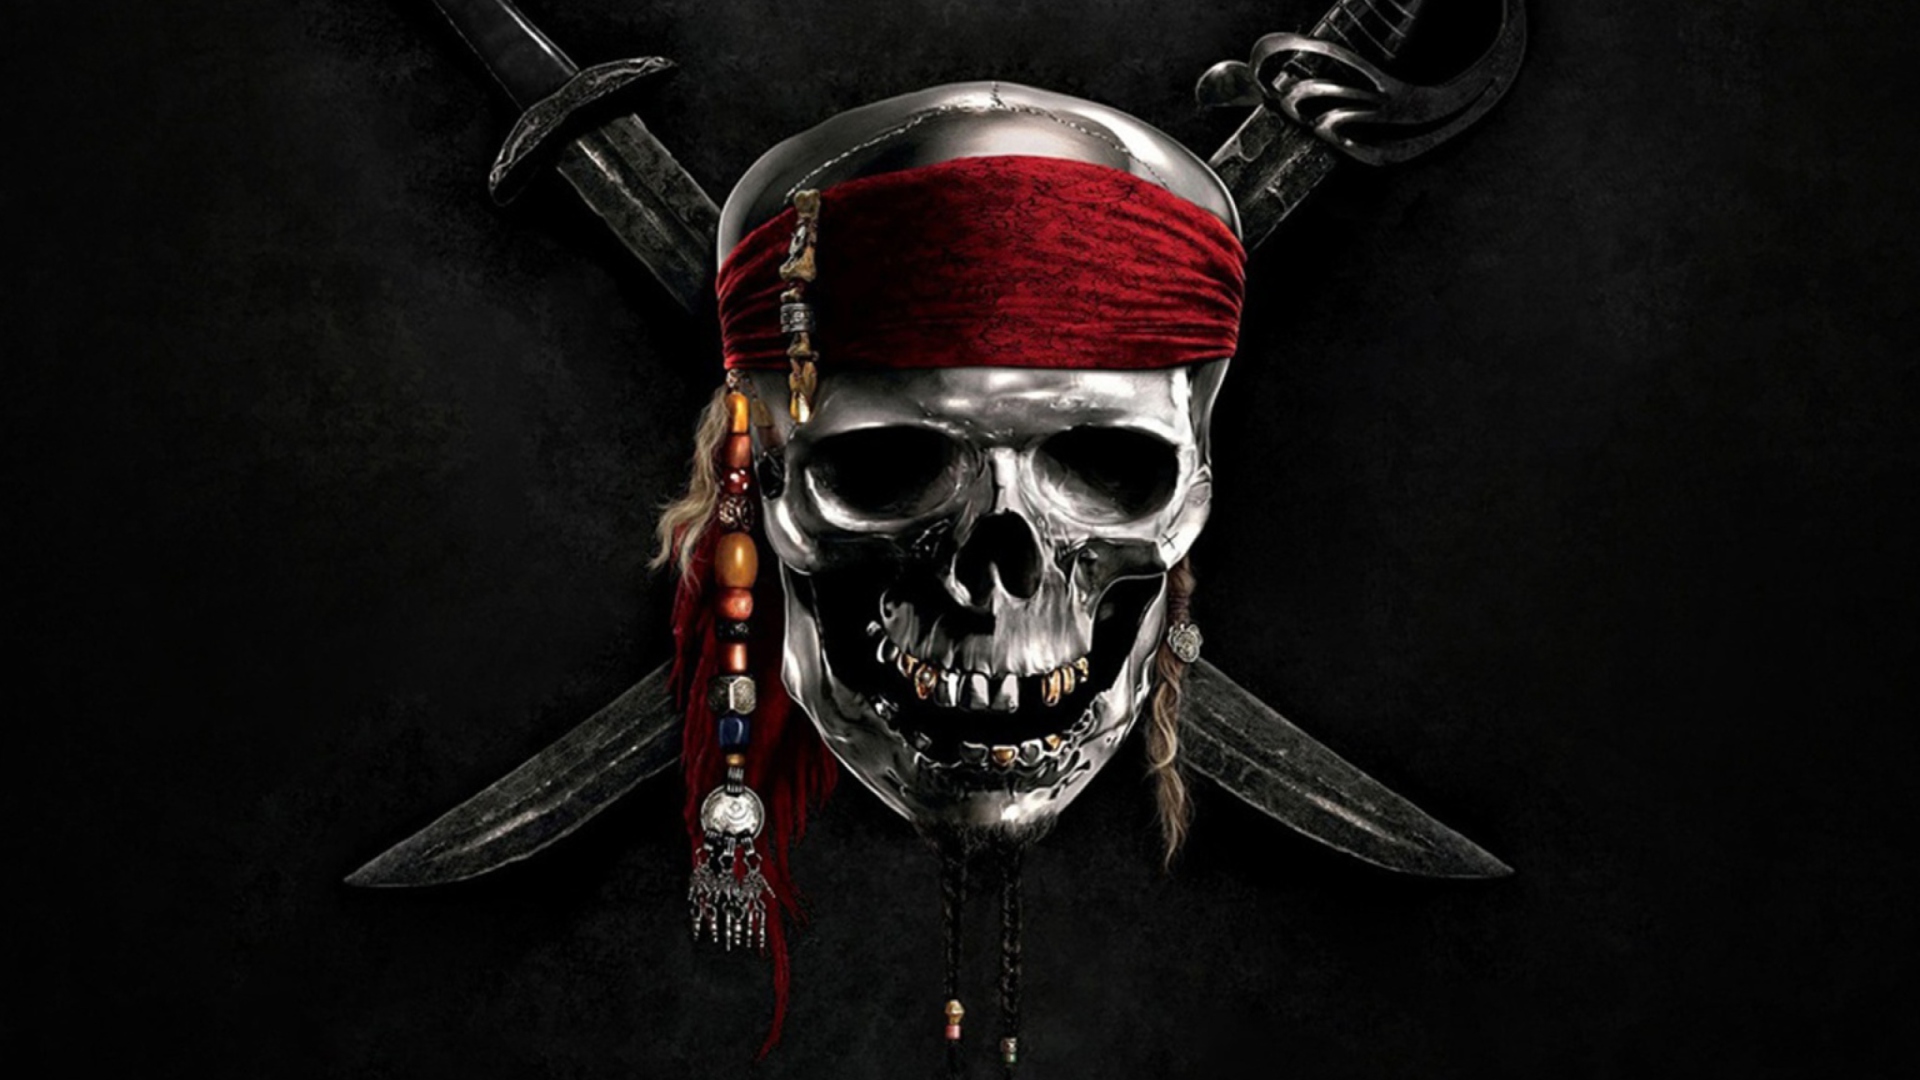 Pirates Of The Caribbean wallpaper 1920x1080